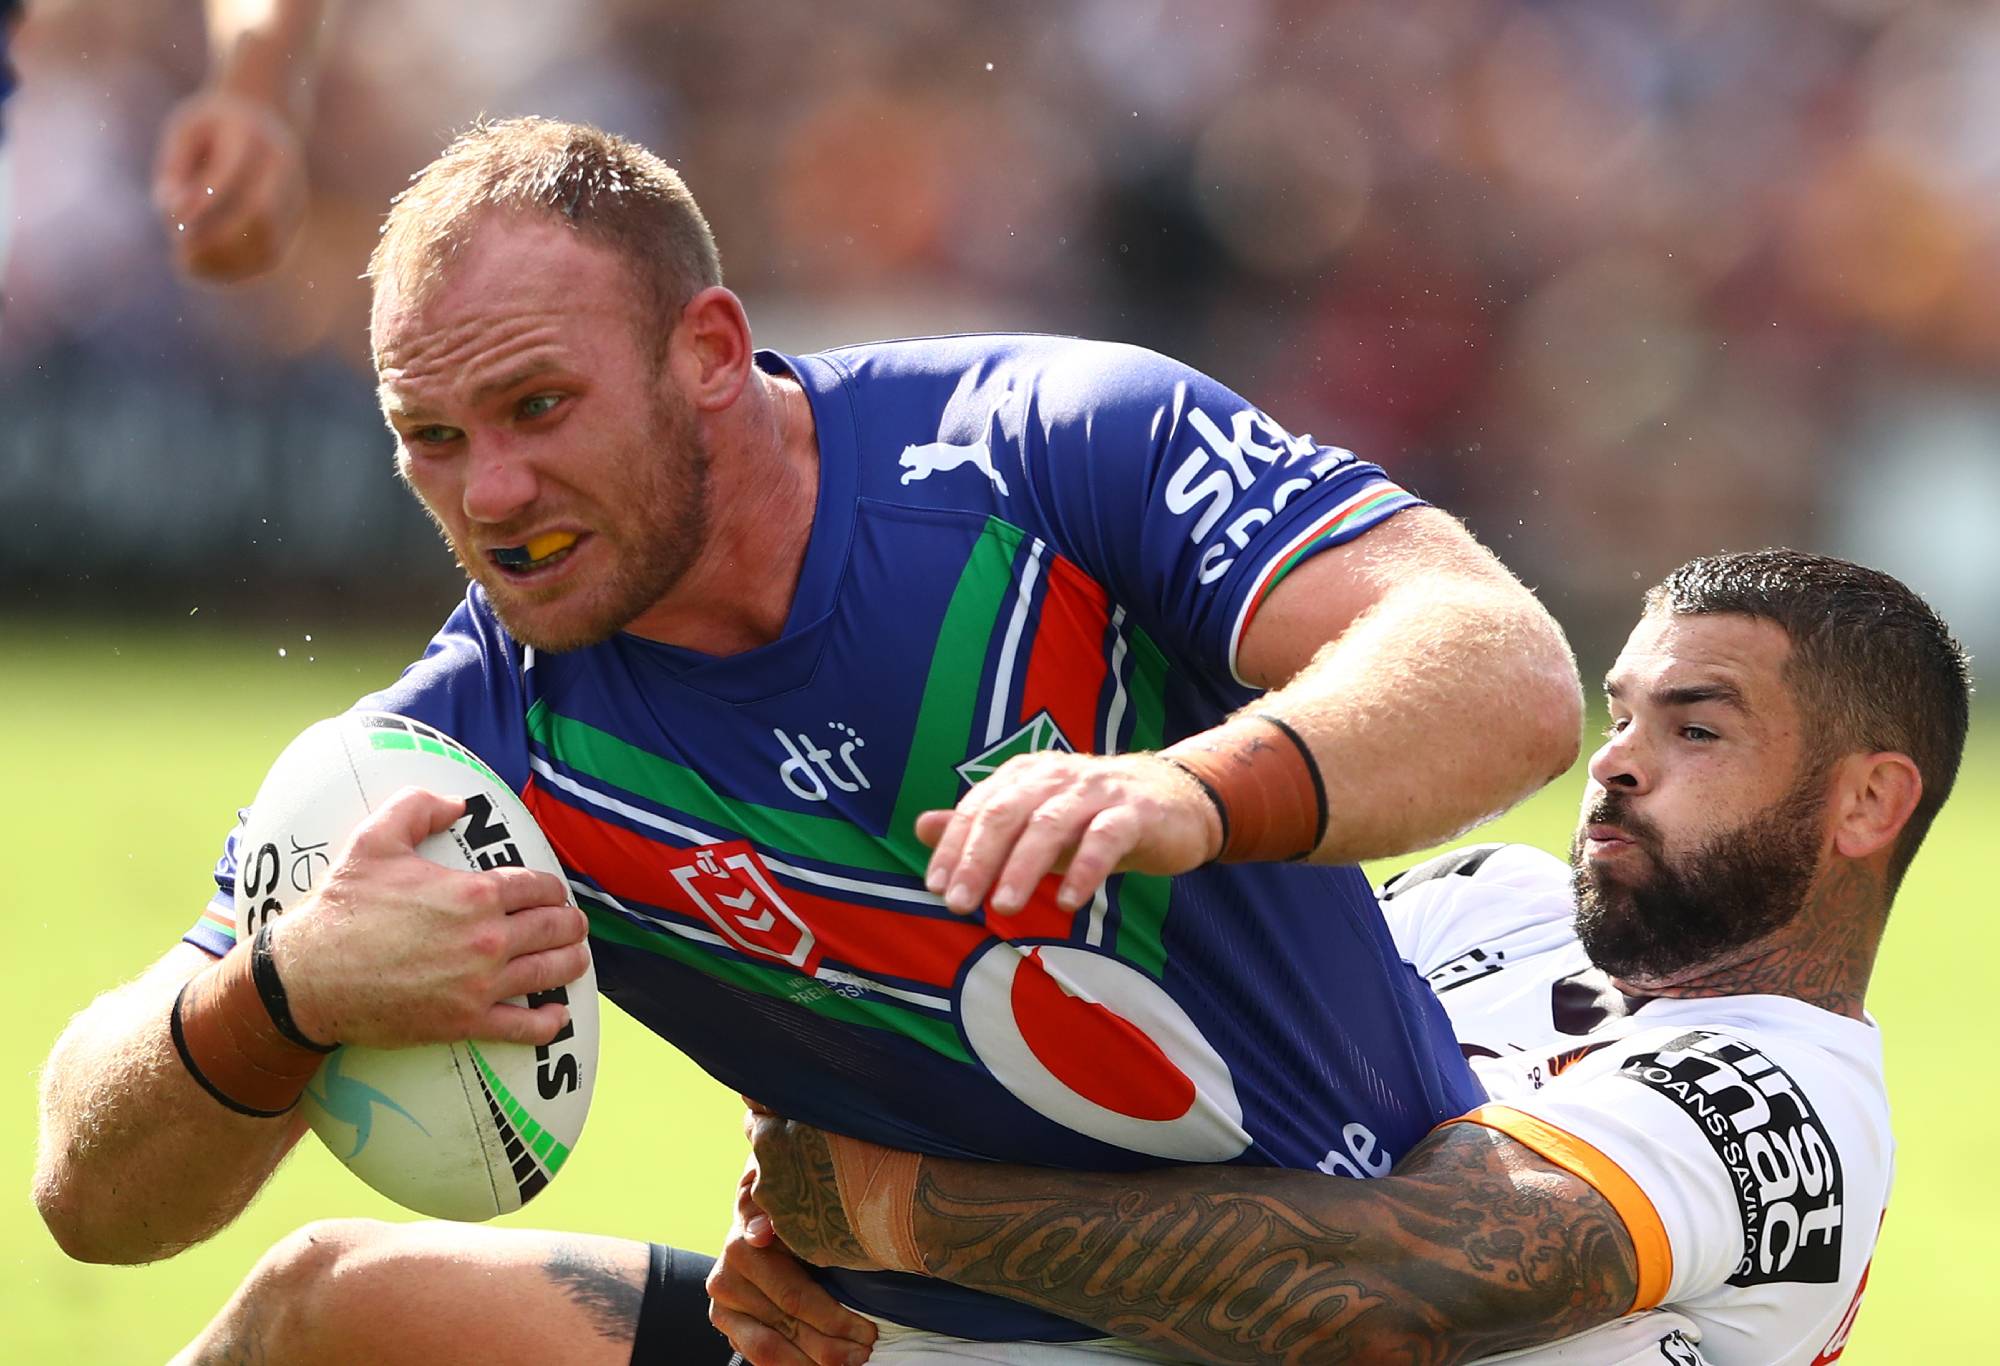 BRISBANE, AUSTRALIA - APRIL 02: Matthew Lodge of the Warriors is tackled during the round four NRL match between the New Zealand Warriors and the Brisbane Broncos at Moreton Daily Stadium, on April 02, 2022, in Brisbane, Australia. (Photo by Chris Hyde/Getty Images)